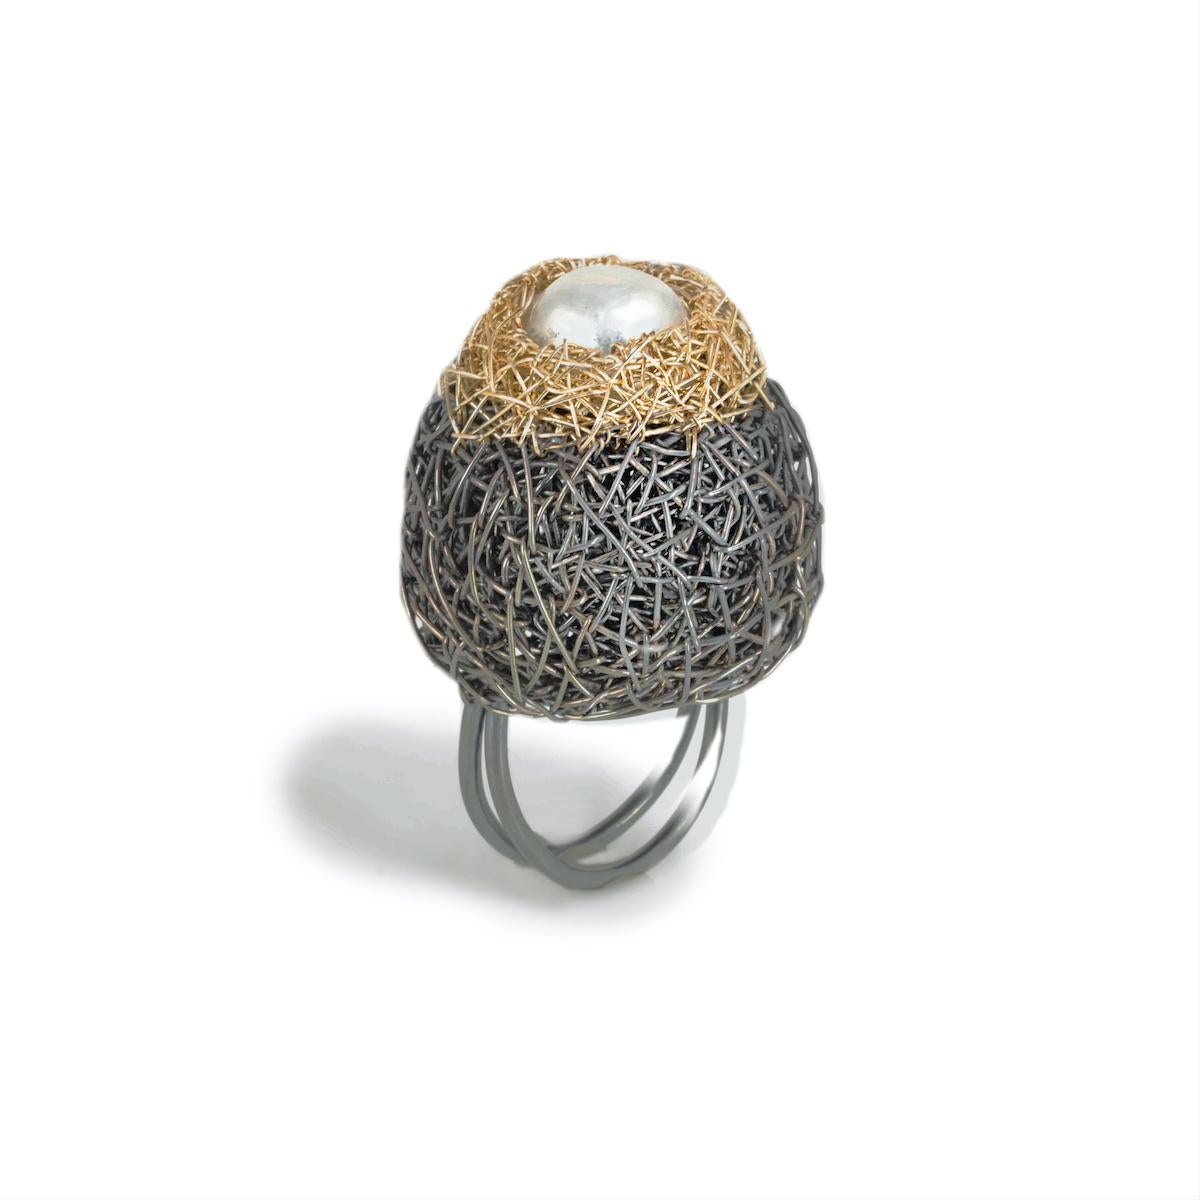 One Off Pearl Ring 14 K Yellow Gold F. Blackened silver by the artist 2